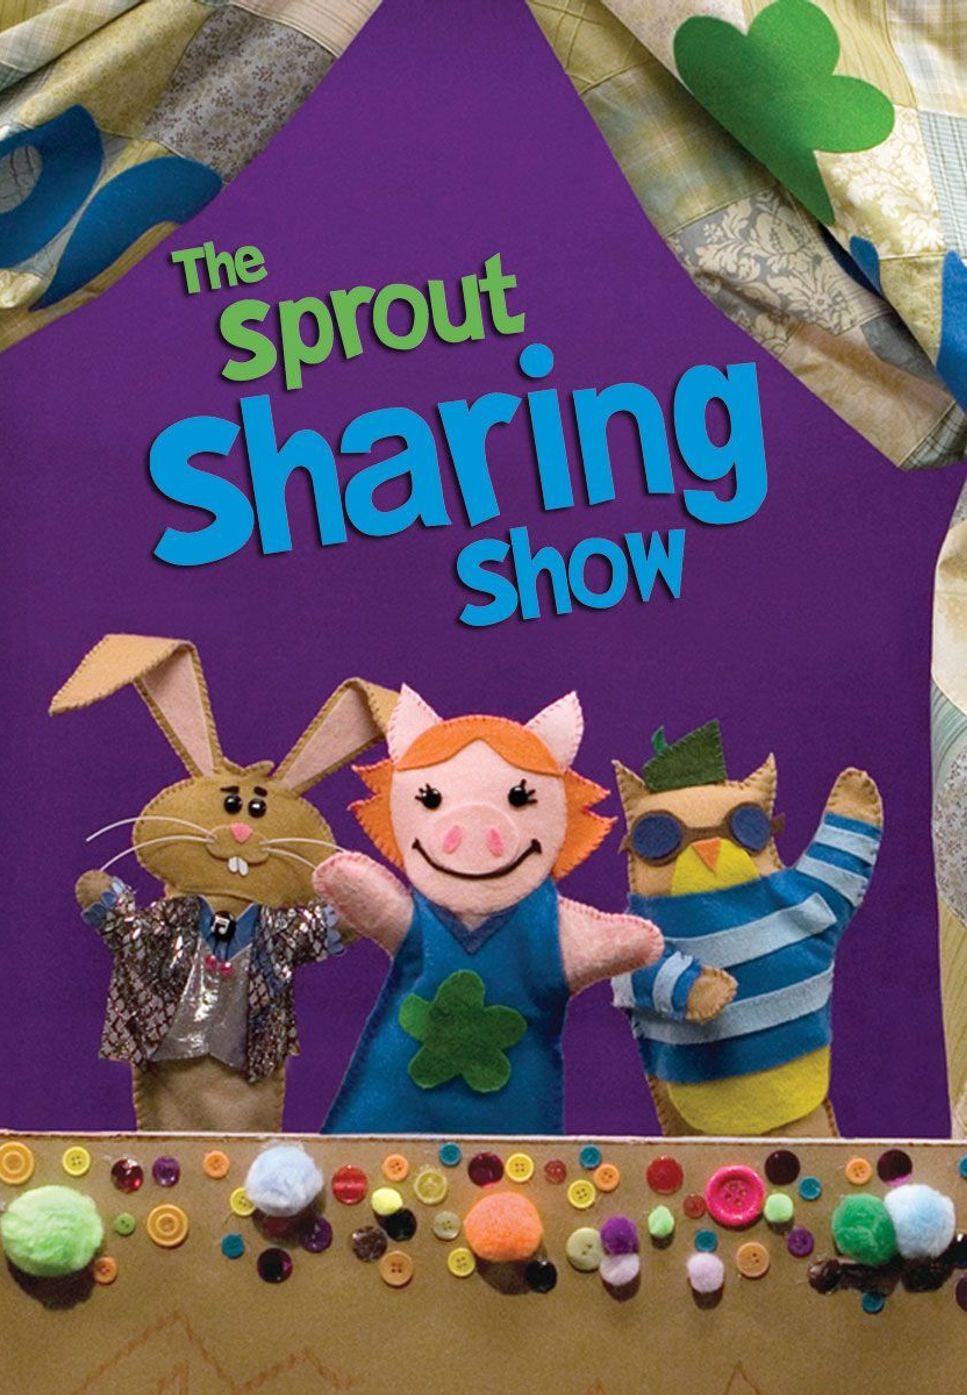 The Sprout Sharing Show - Theme Song by PianoFreaks